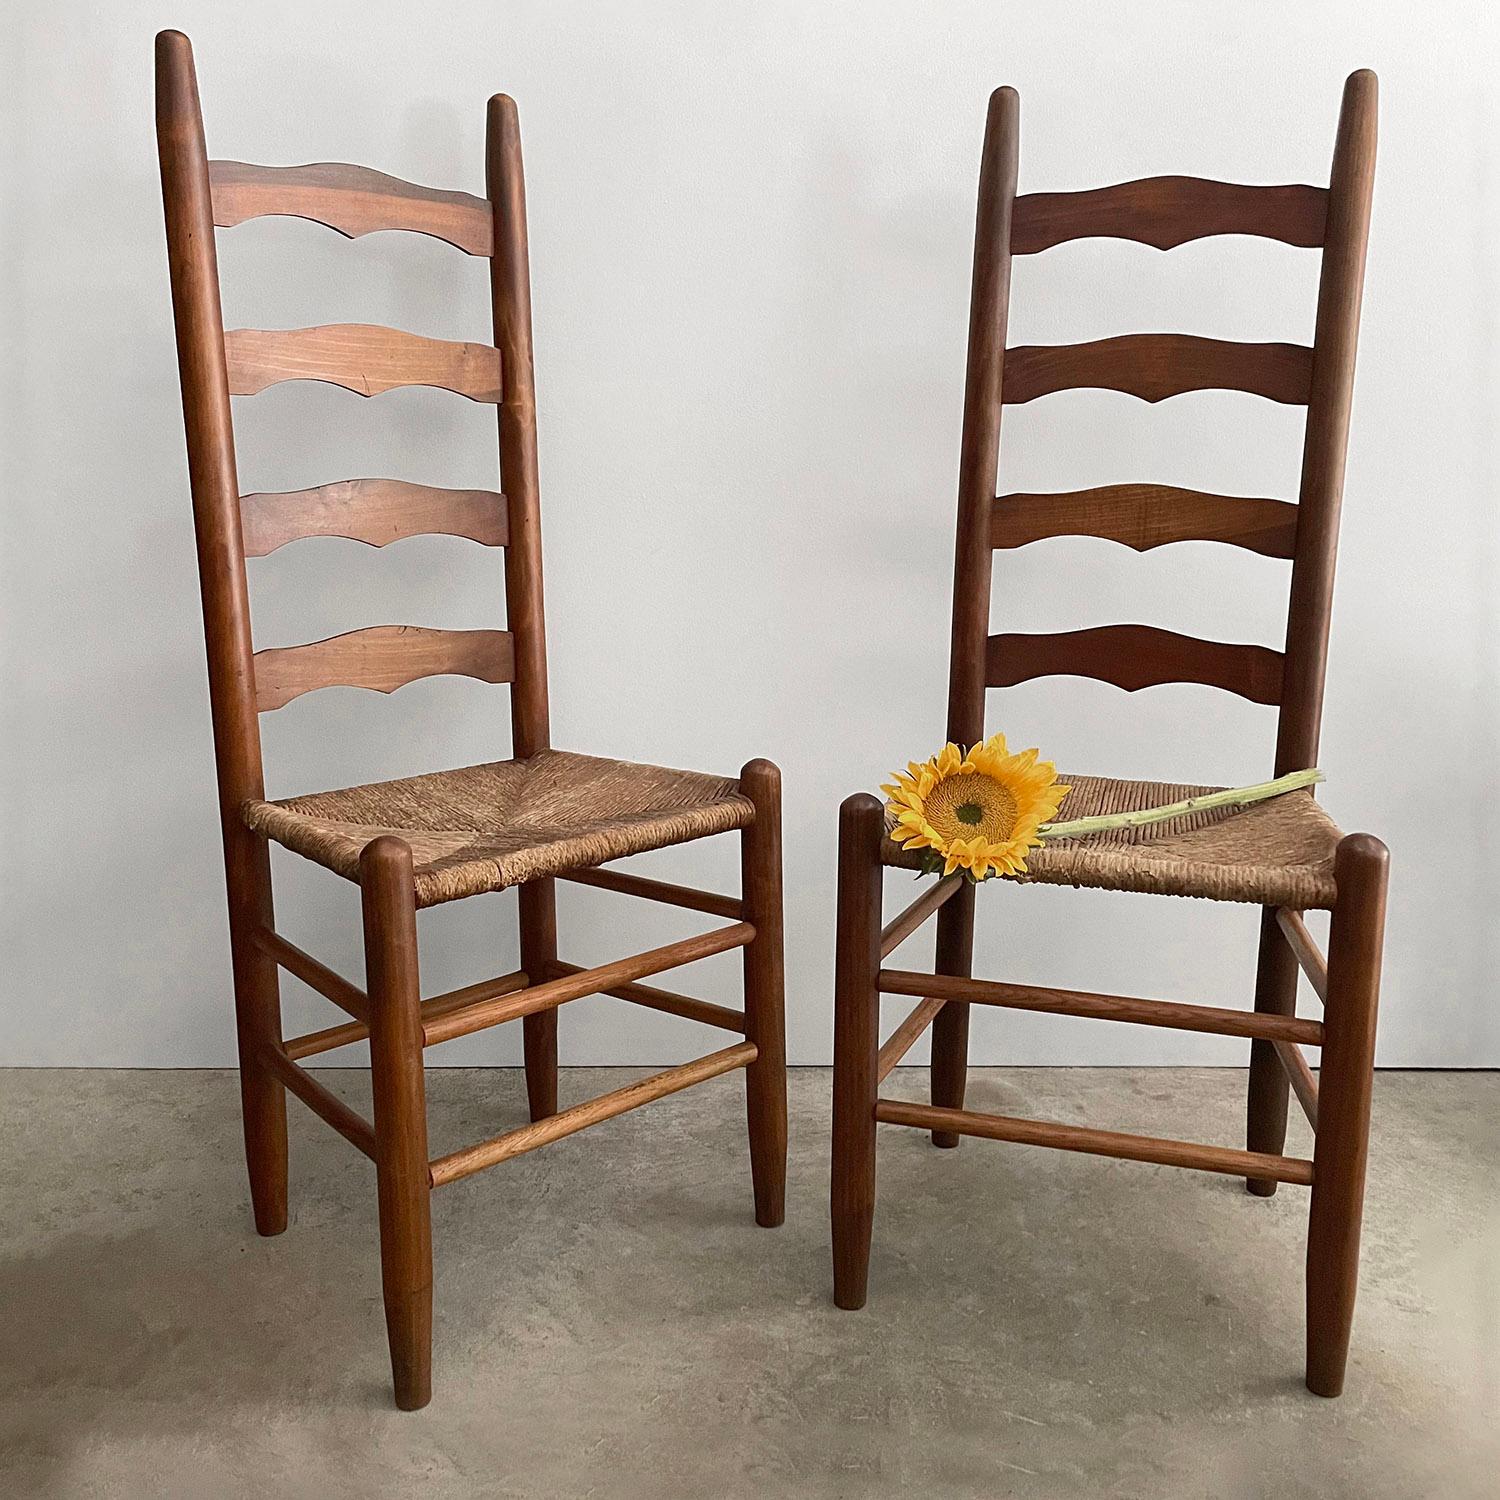 Rustic French ladder back chair
Solid wood chair frames 
Beautiful wood grain detail and natural color variations throughout 
Woven rush seats have minor imperfections from years of love and service 
Please reference photos 
Newly reconditioned